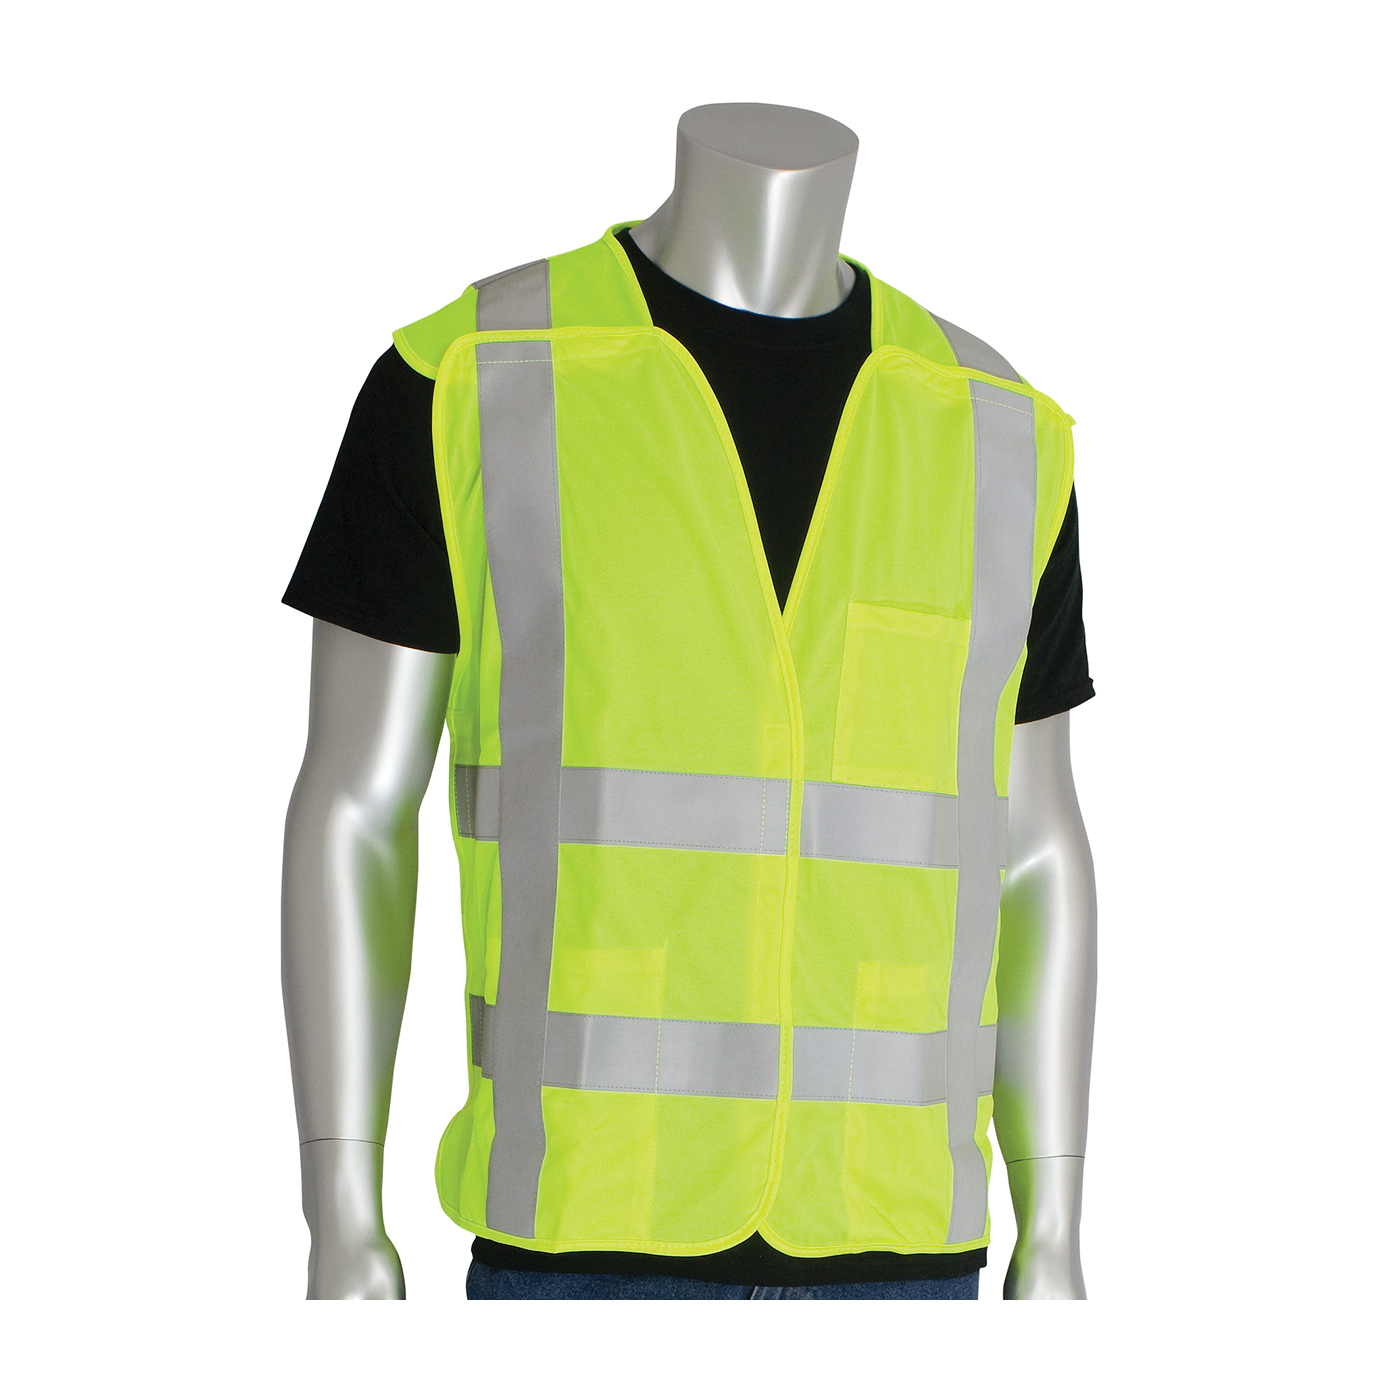 PIP® SafetyGear 305-5PVFRLY-4X/5X FR Treated Solid Vest, 4XL/5XL, Hi-Viz Yellow, Polyester, Hook and Loop Closure, ANSI Class: Class 2, Specifications Met: ANSI/ISEA 107